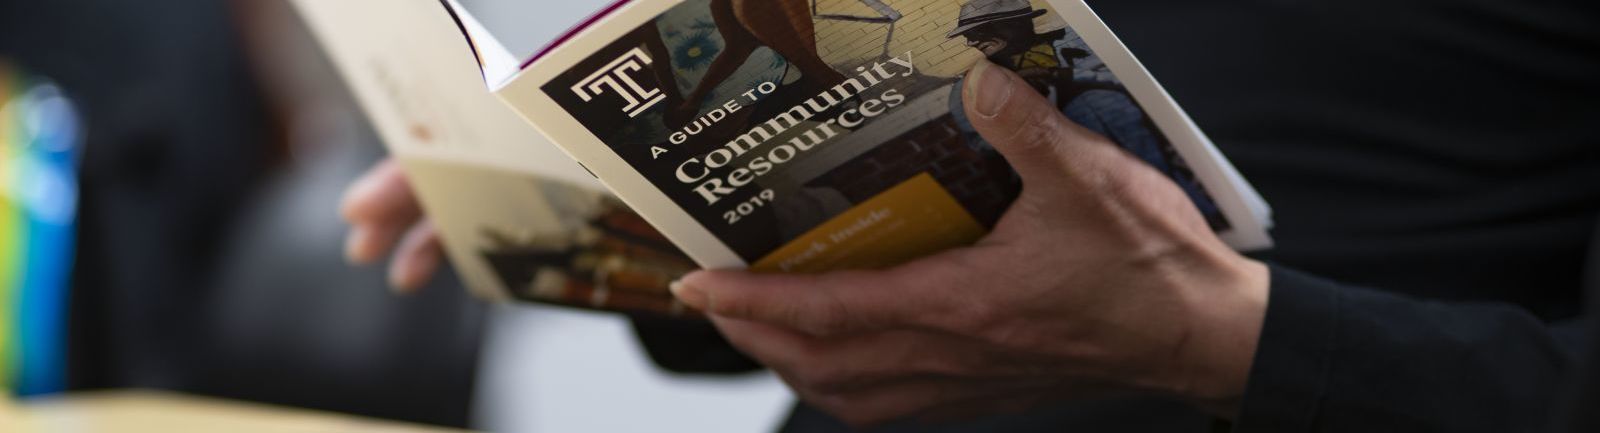 A community member studies a Temple guide to community resources.